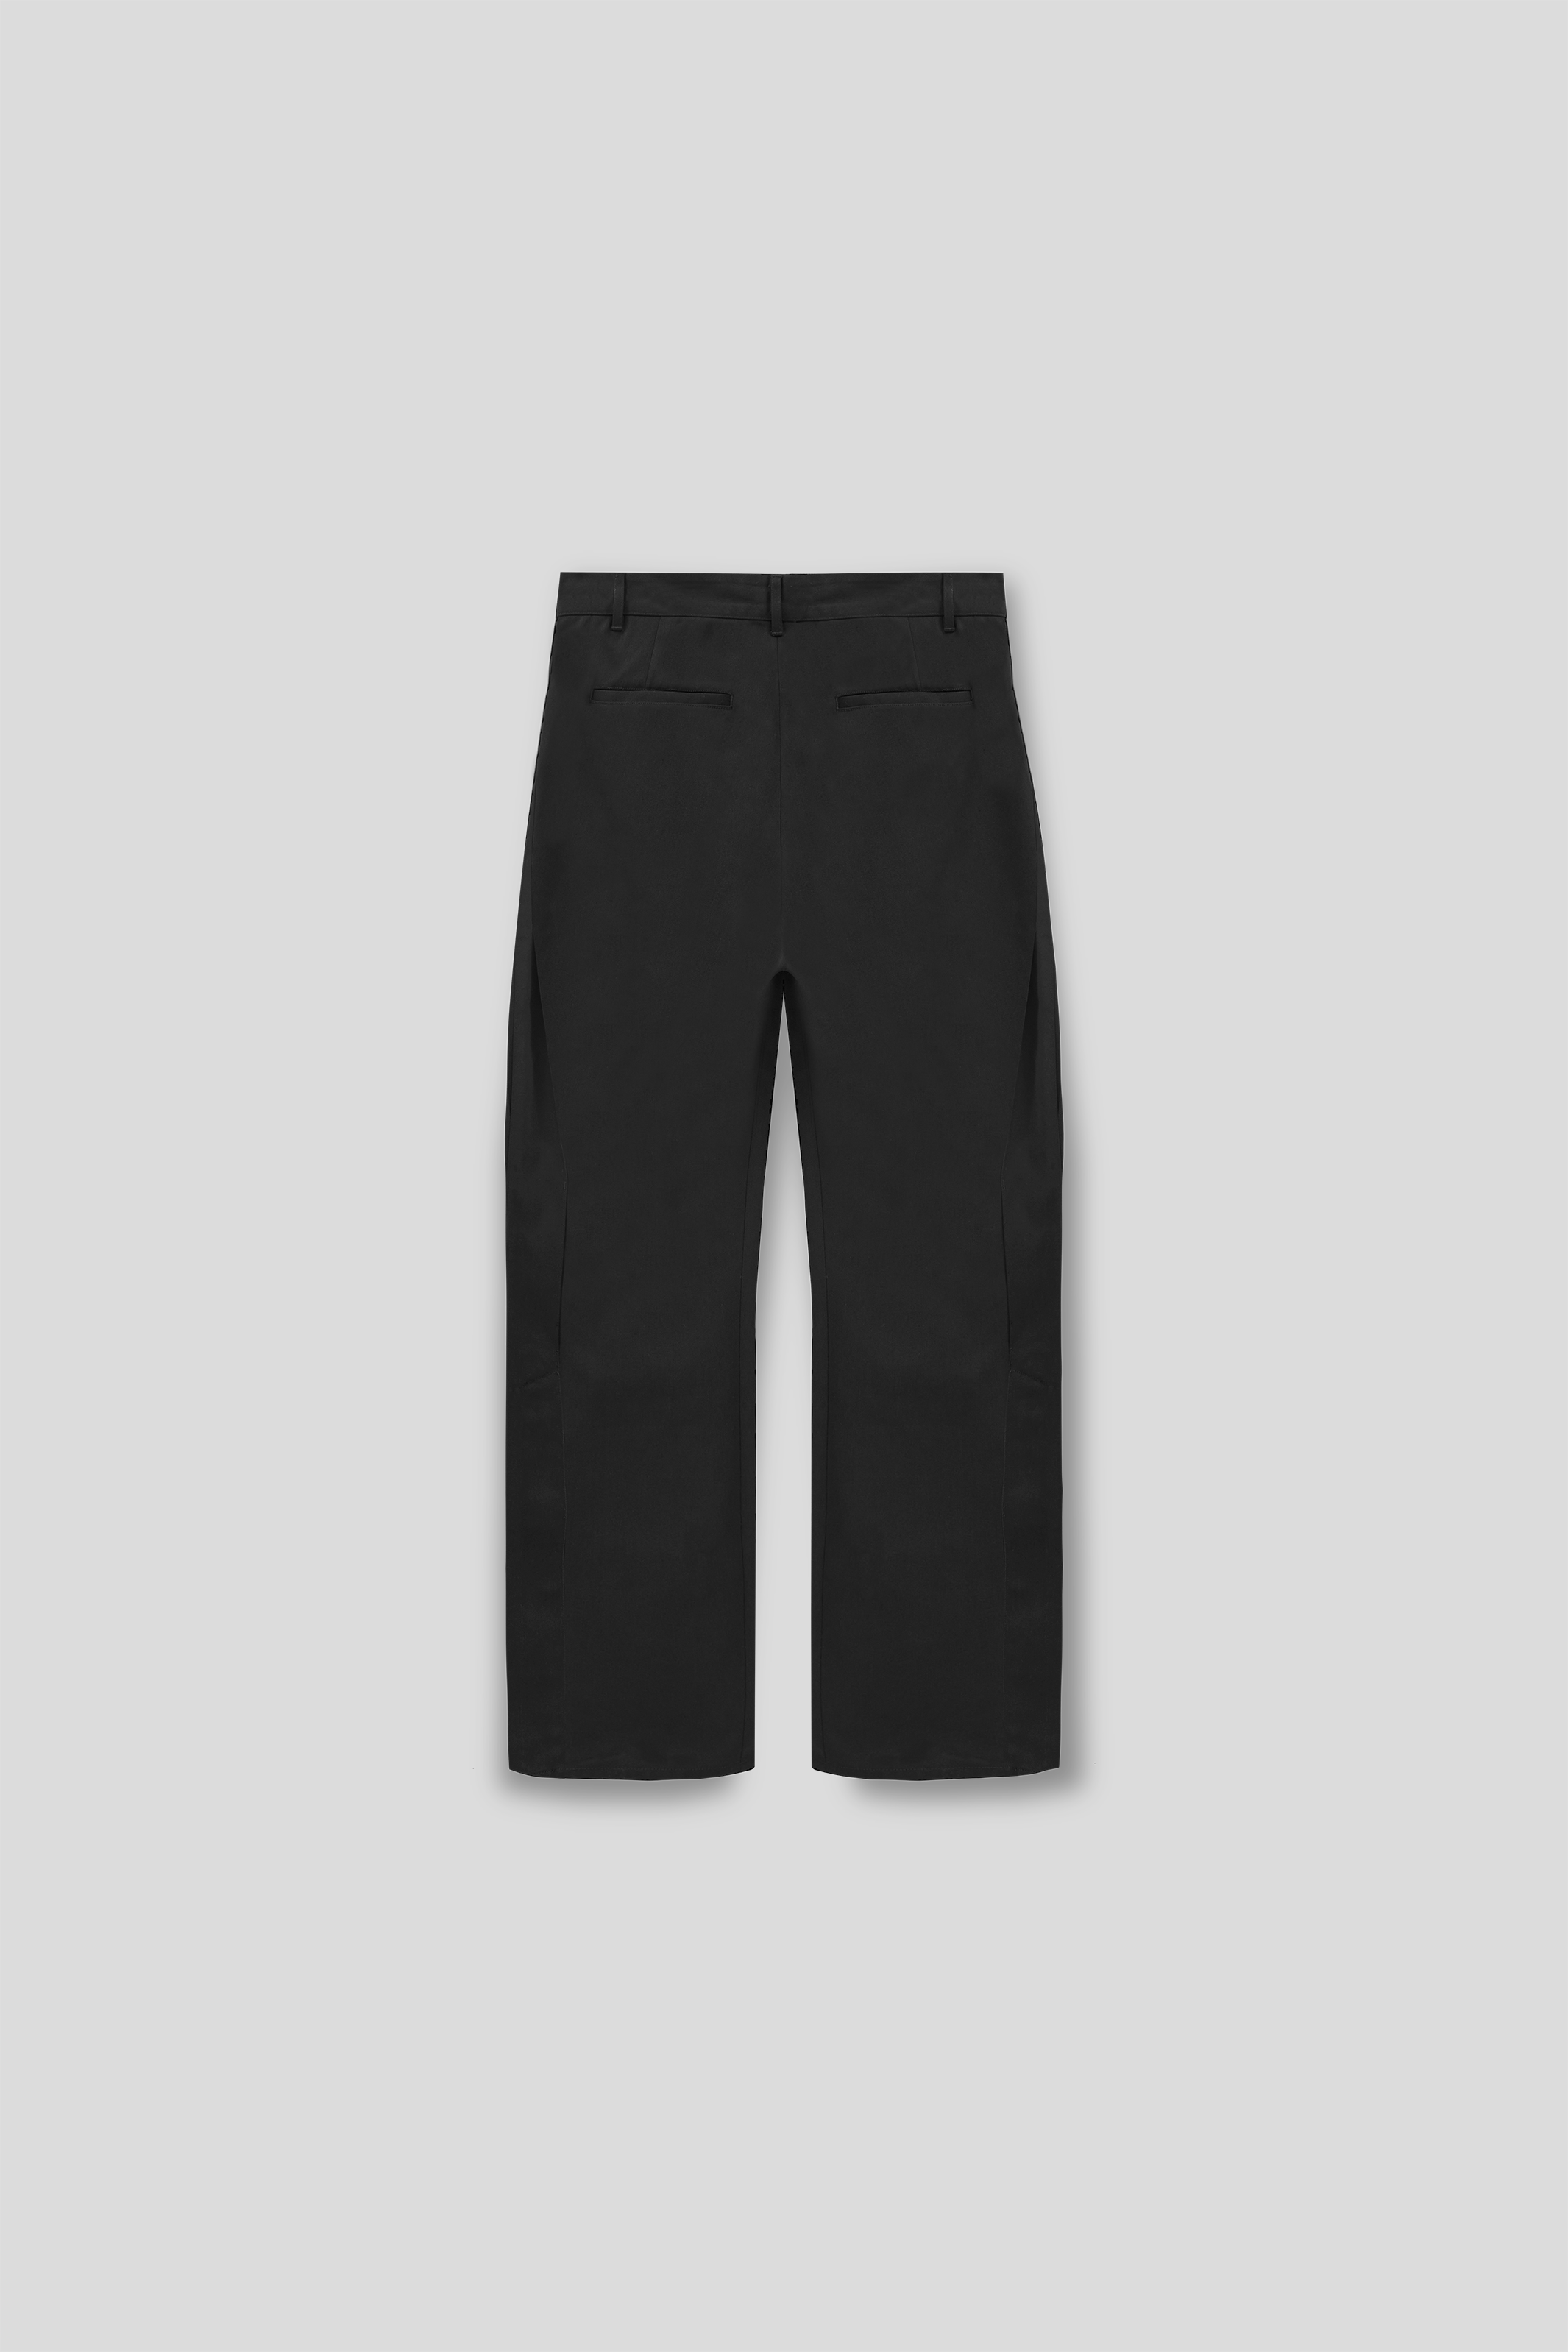 GALA PLEATED TROUSERS IN BLACK